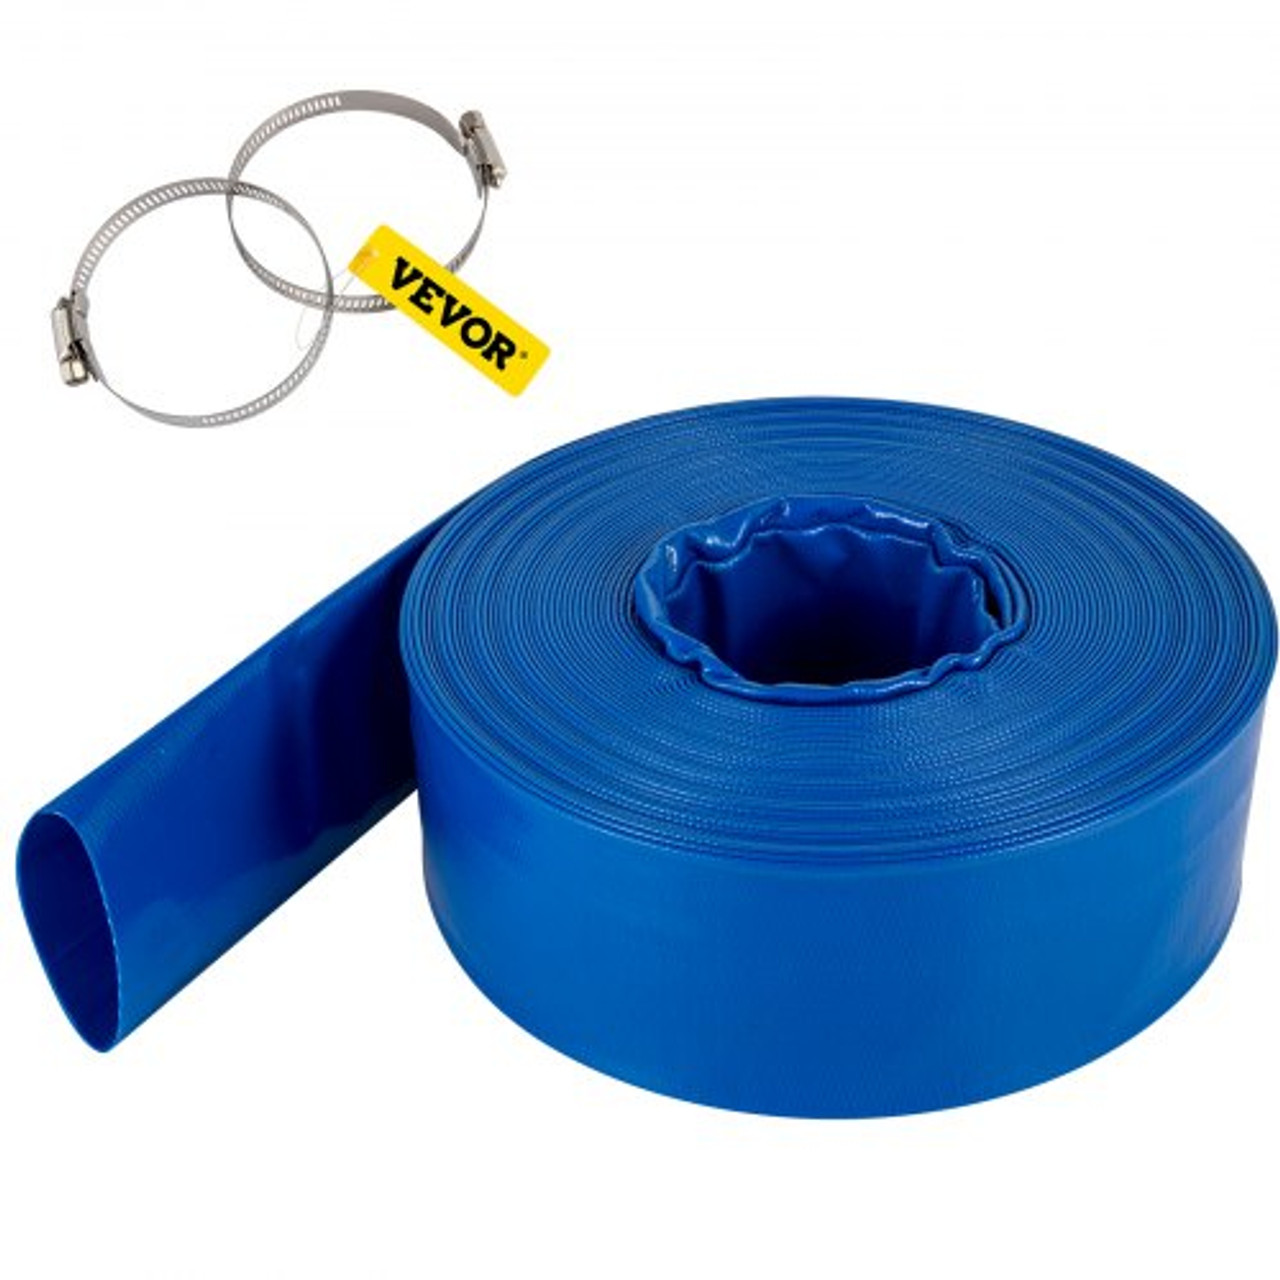 Discharge Hose, 2" x 105', PVC Fabric Lay Flat Hose, Heavy Duty Backwash Drain Hose with Clamps, Weather-proof & Burst-proof, Ideal for Swimming Pool & Water Transfer, Blue